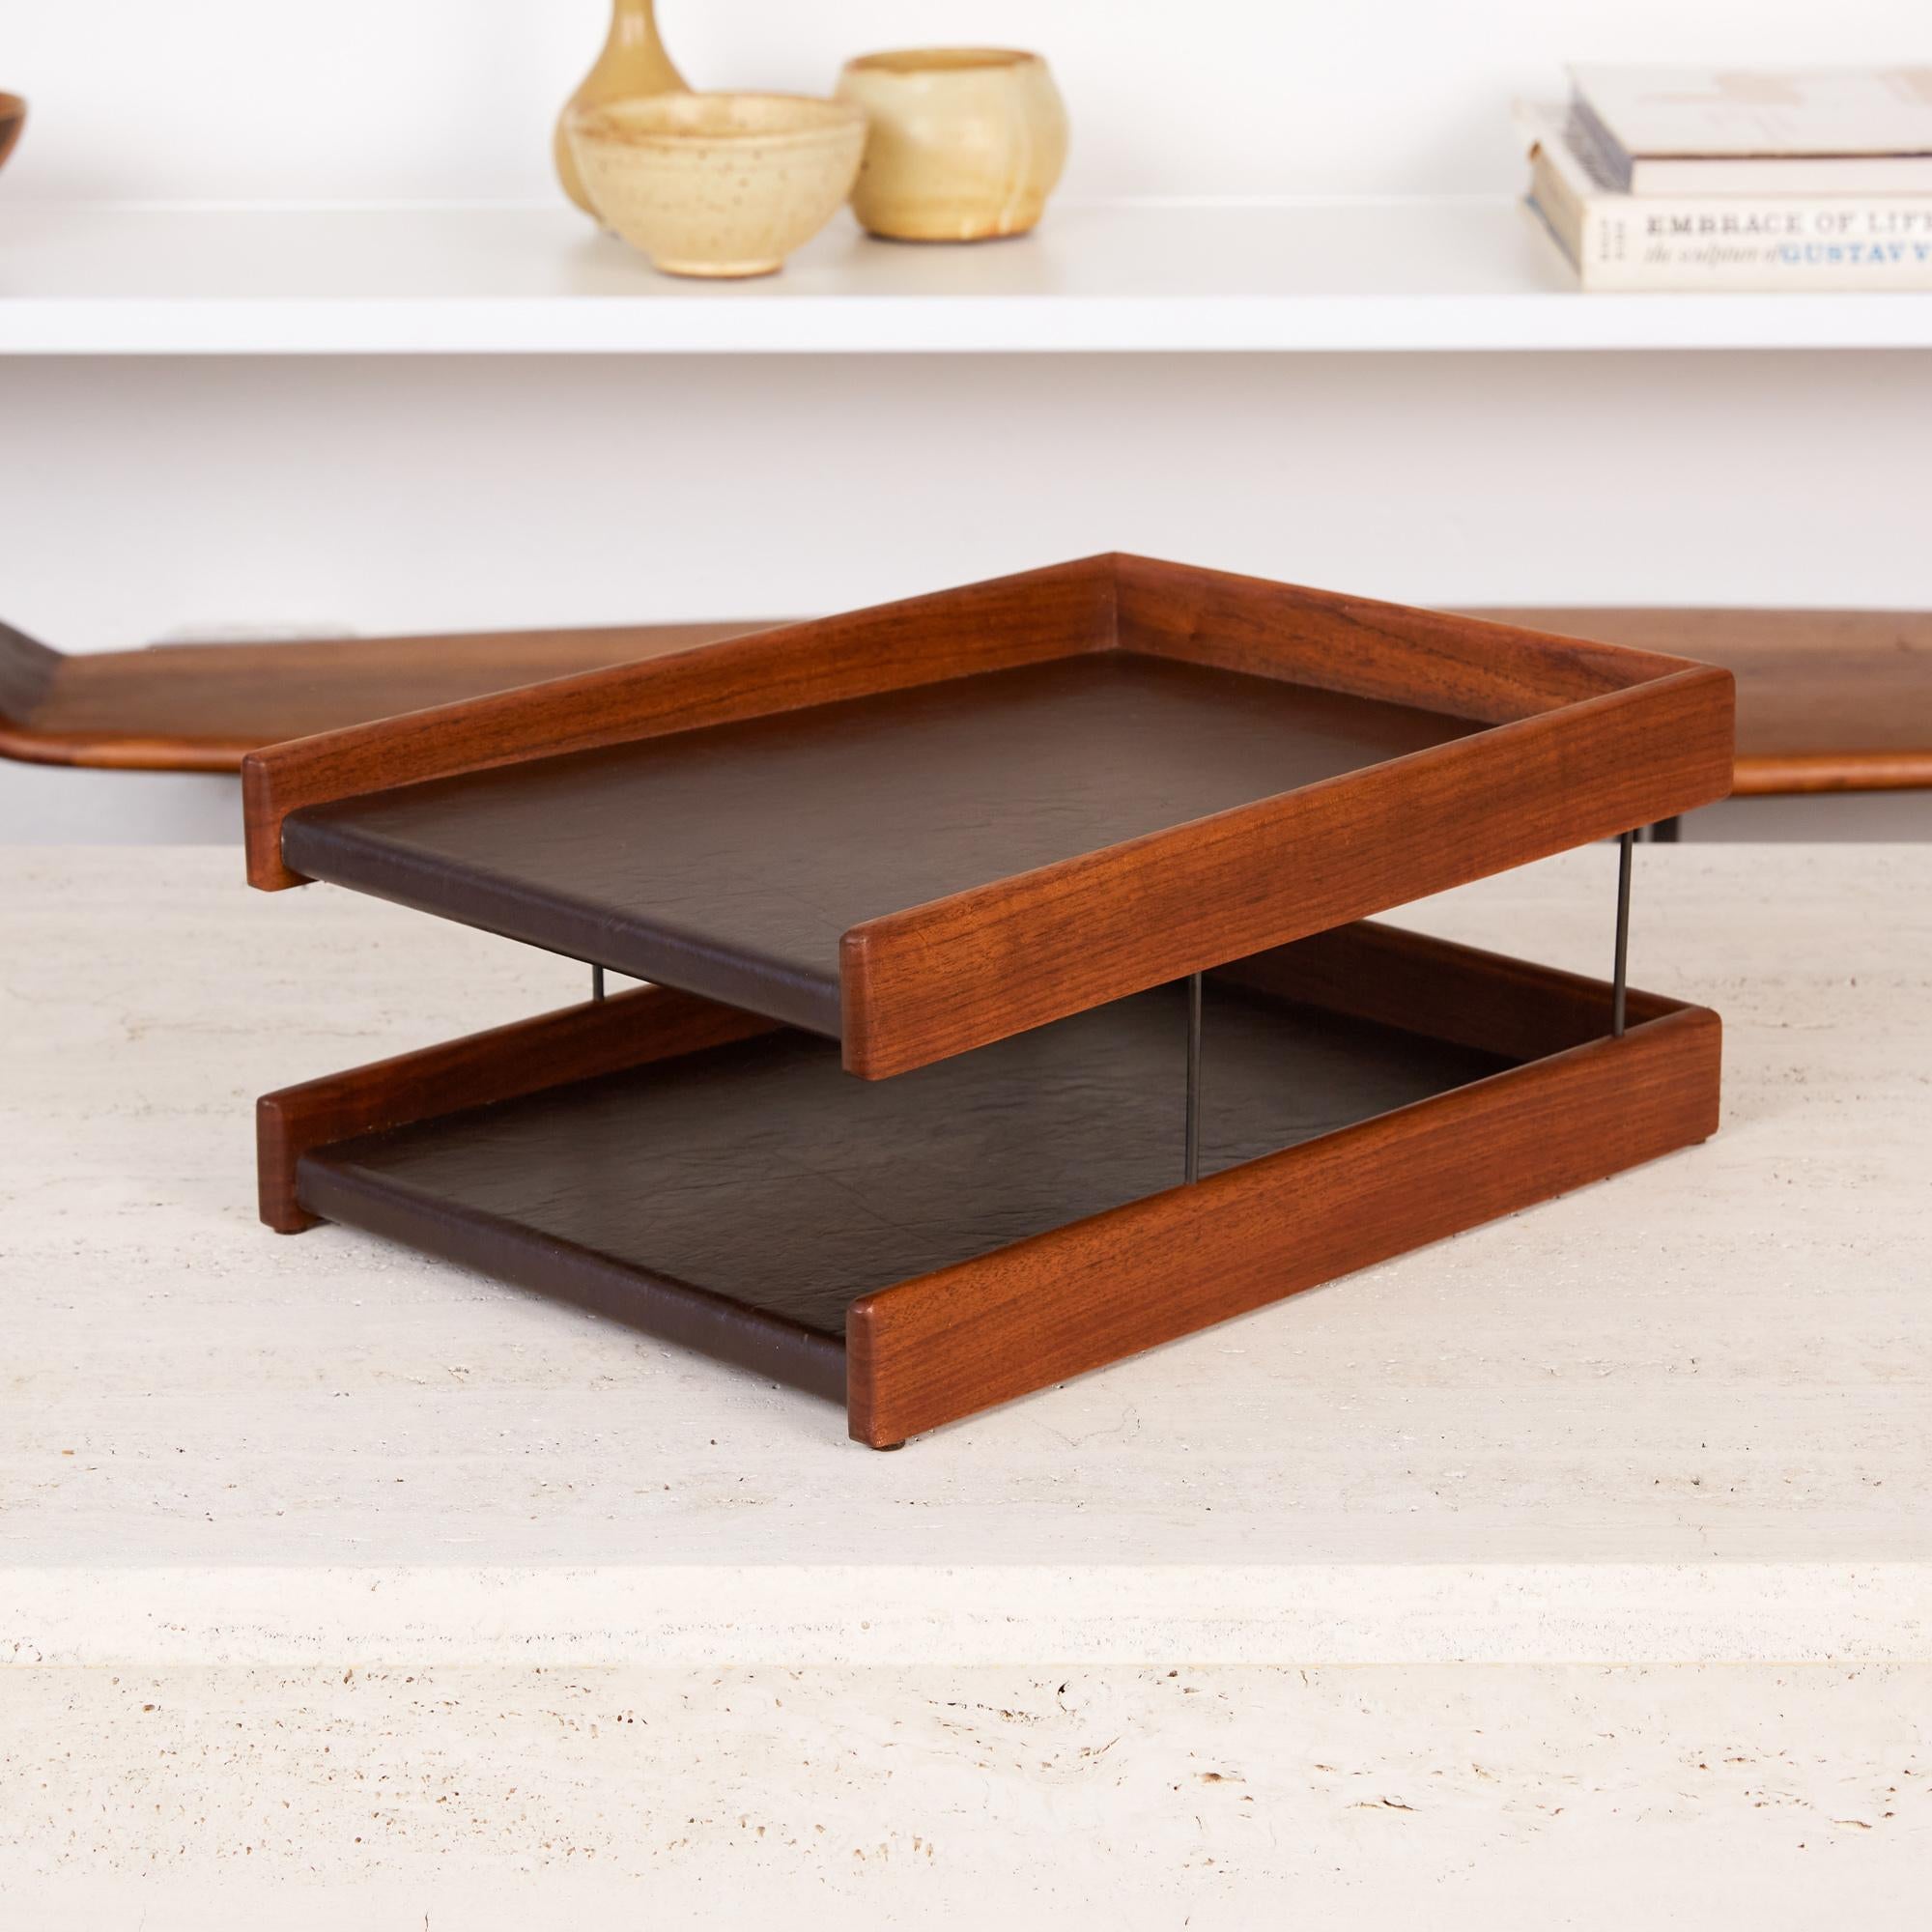 Walnut and vinyl paper tray by DAPCO, Italy, circa 1960s. The tray features dual brown vinyl lined trays, with oiled walnut cases and patinated brass pins supporting the upper tier. Marked Di - DAPCo and model number [5013T-W] on